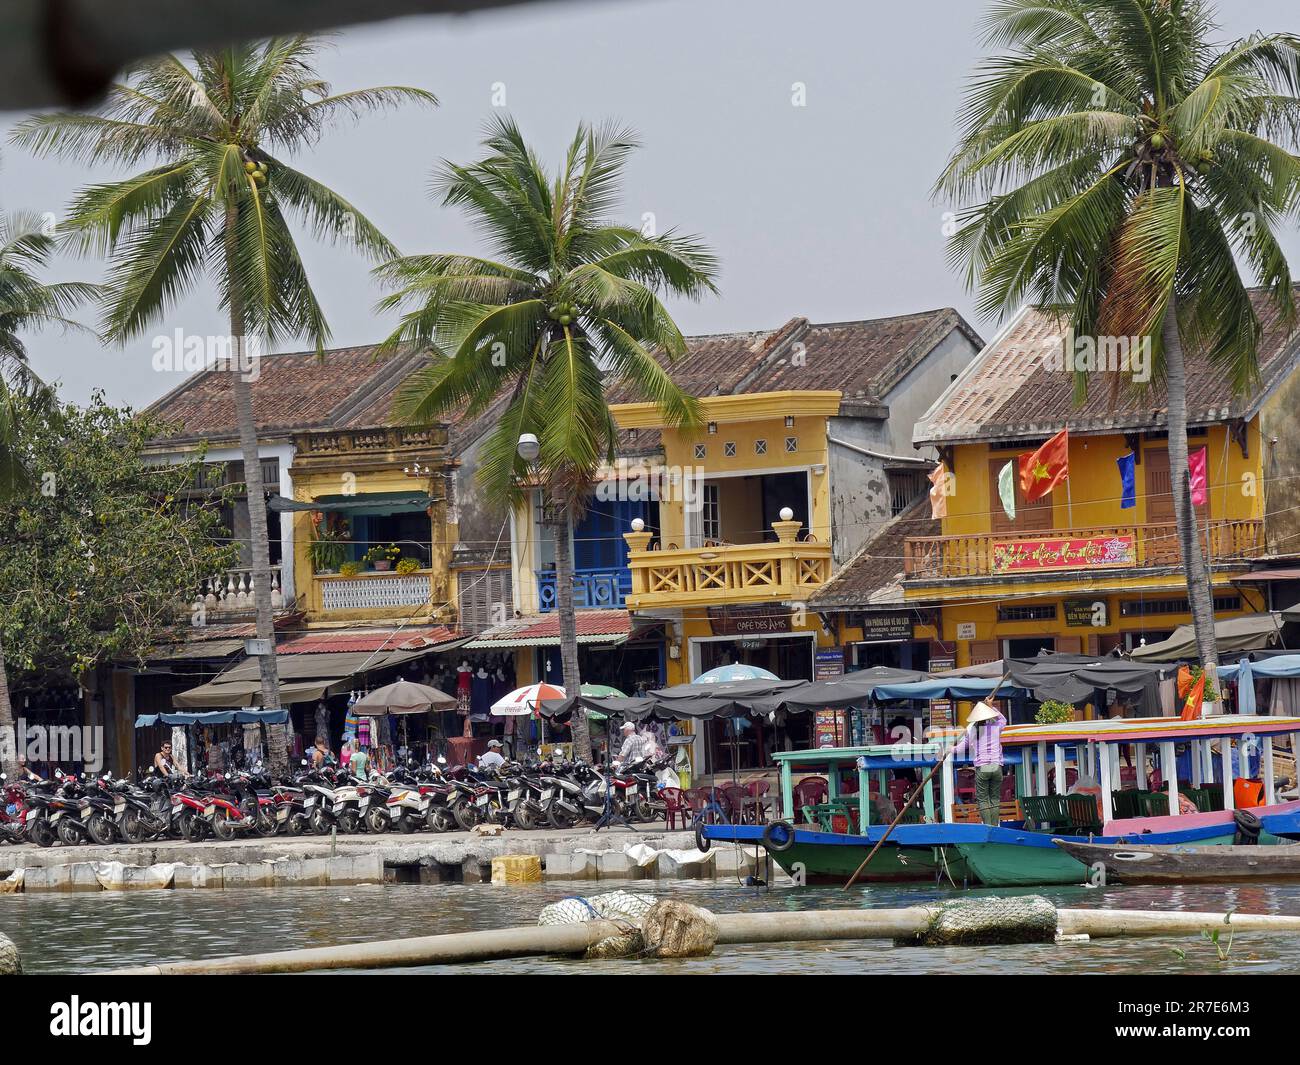 Vietnam, Quang Nam Province, Hoi An City, Old City listed at World Heritage site by Unesco Stock Photo